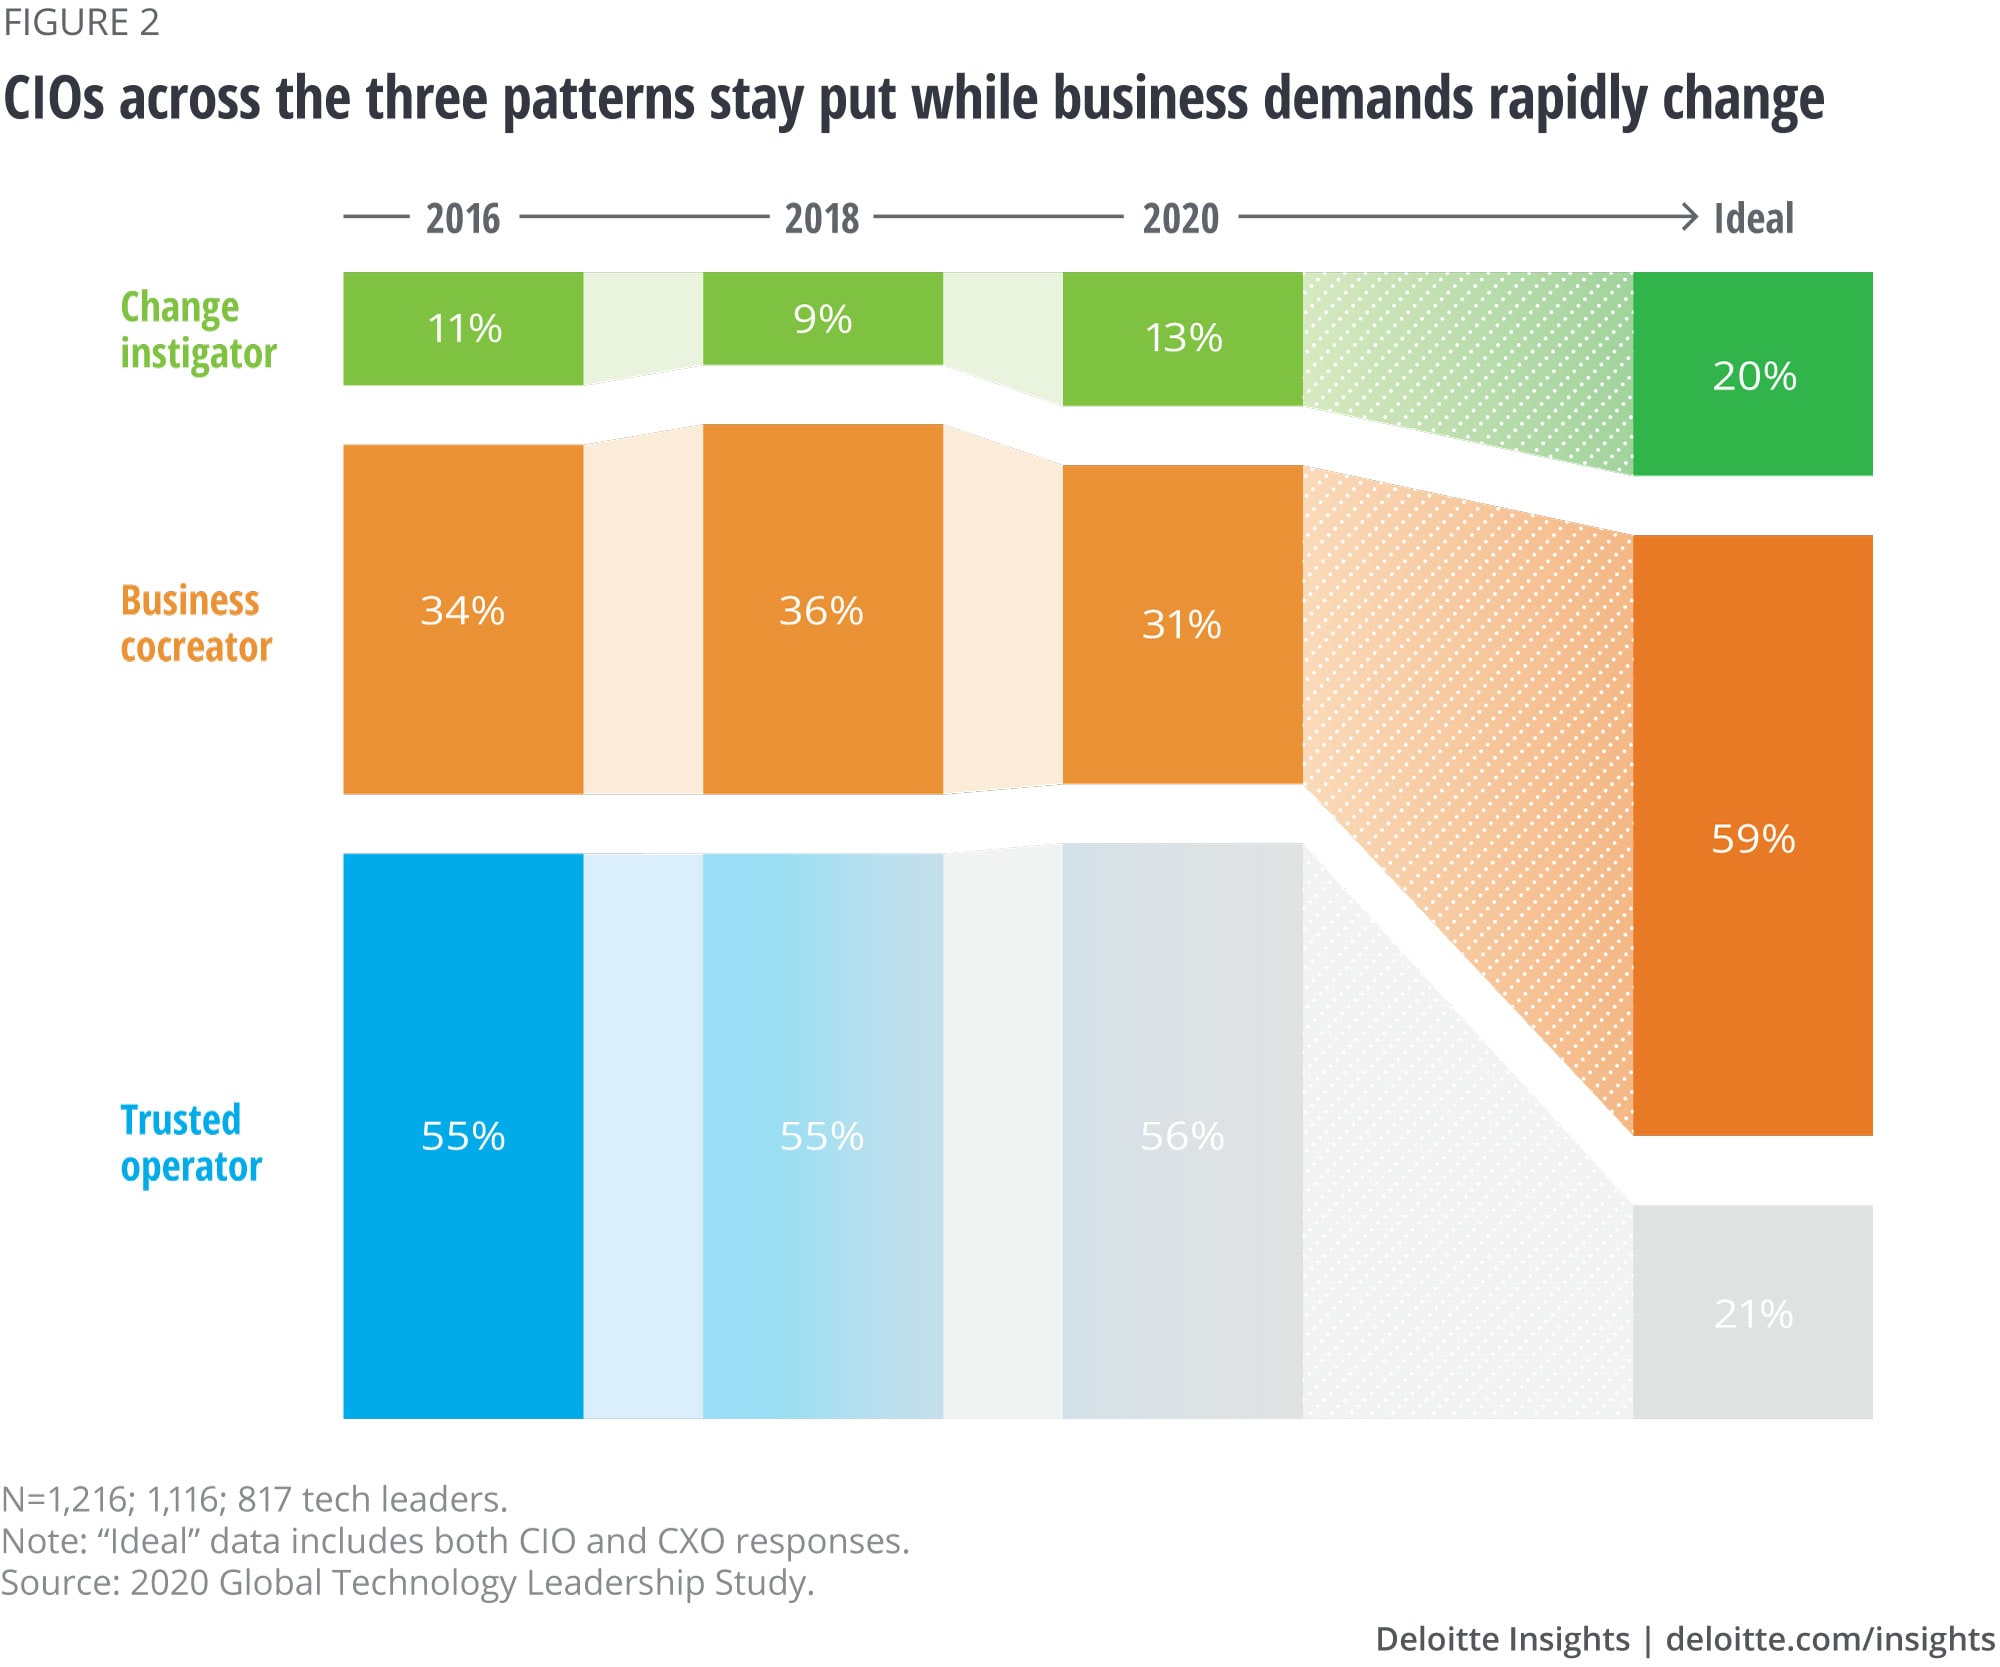 CIOs across the three patterns stay put while business demands rapidly change